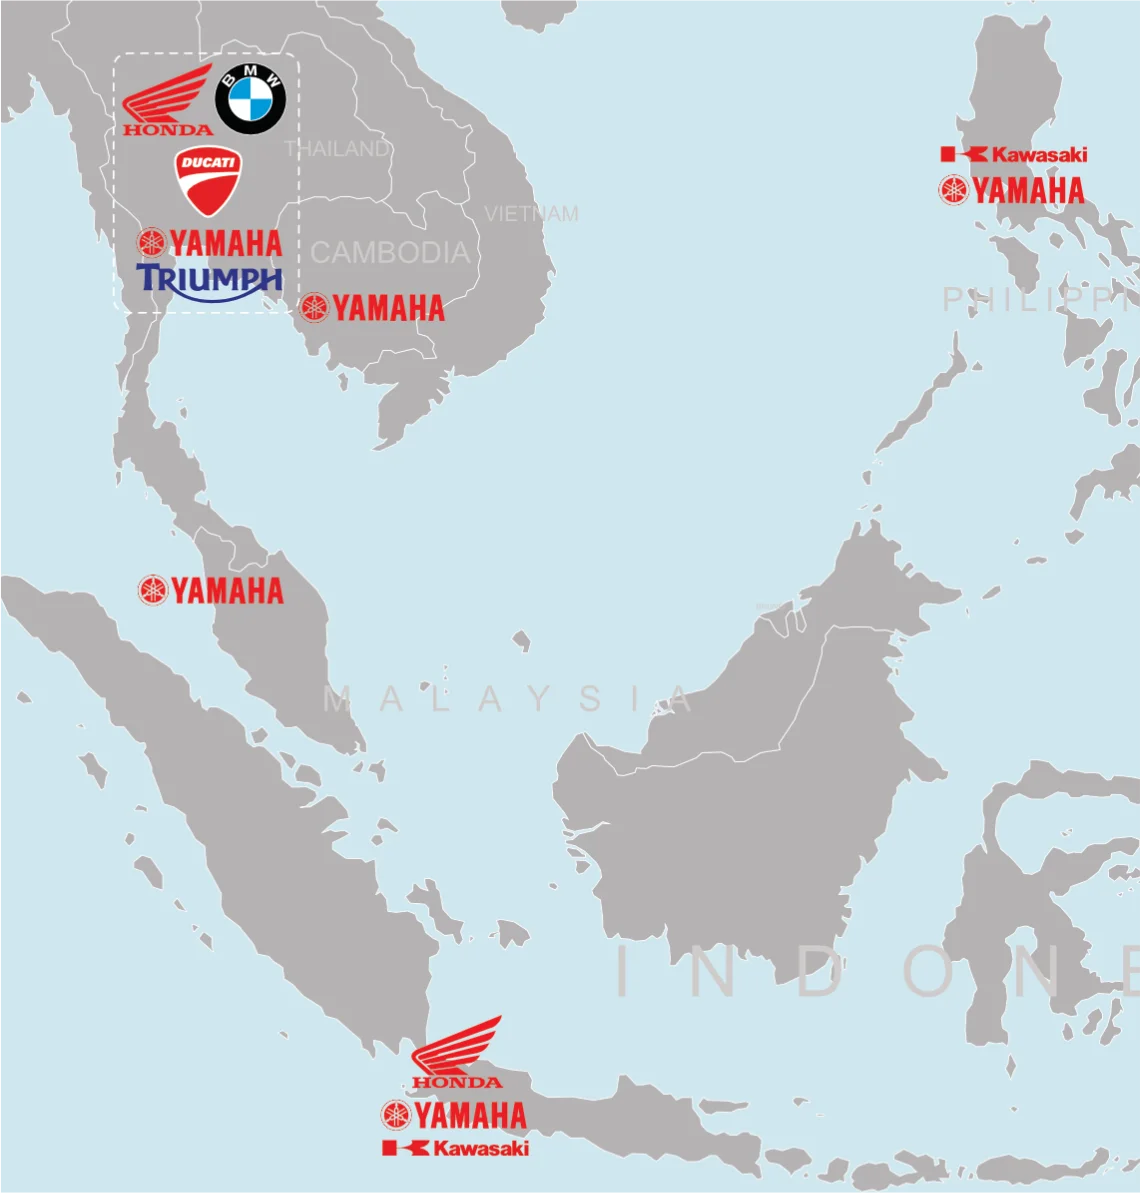 Southeast Asia motorcycle factories